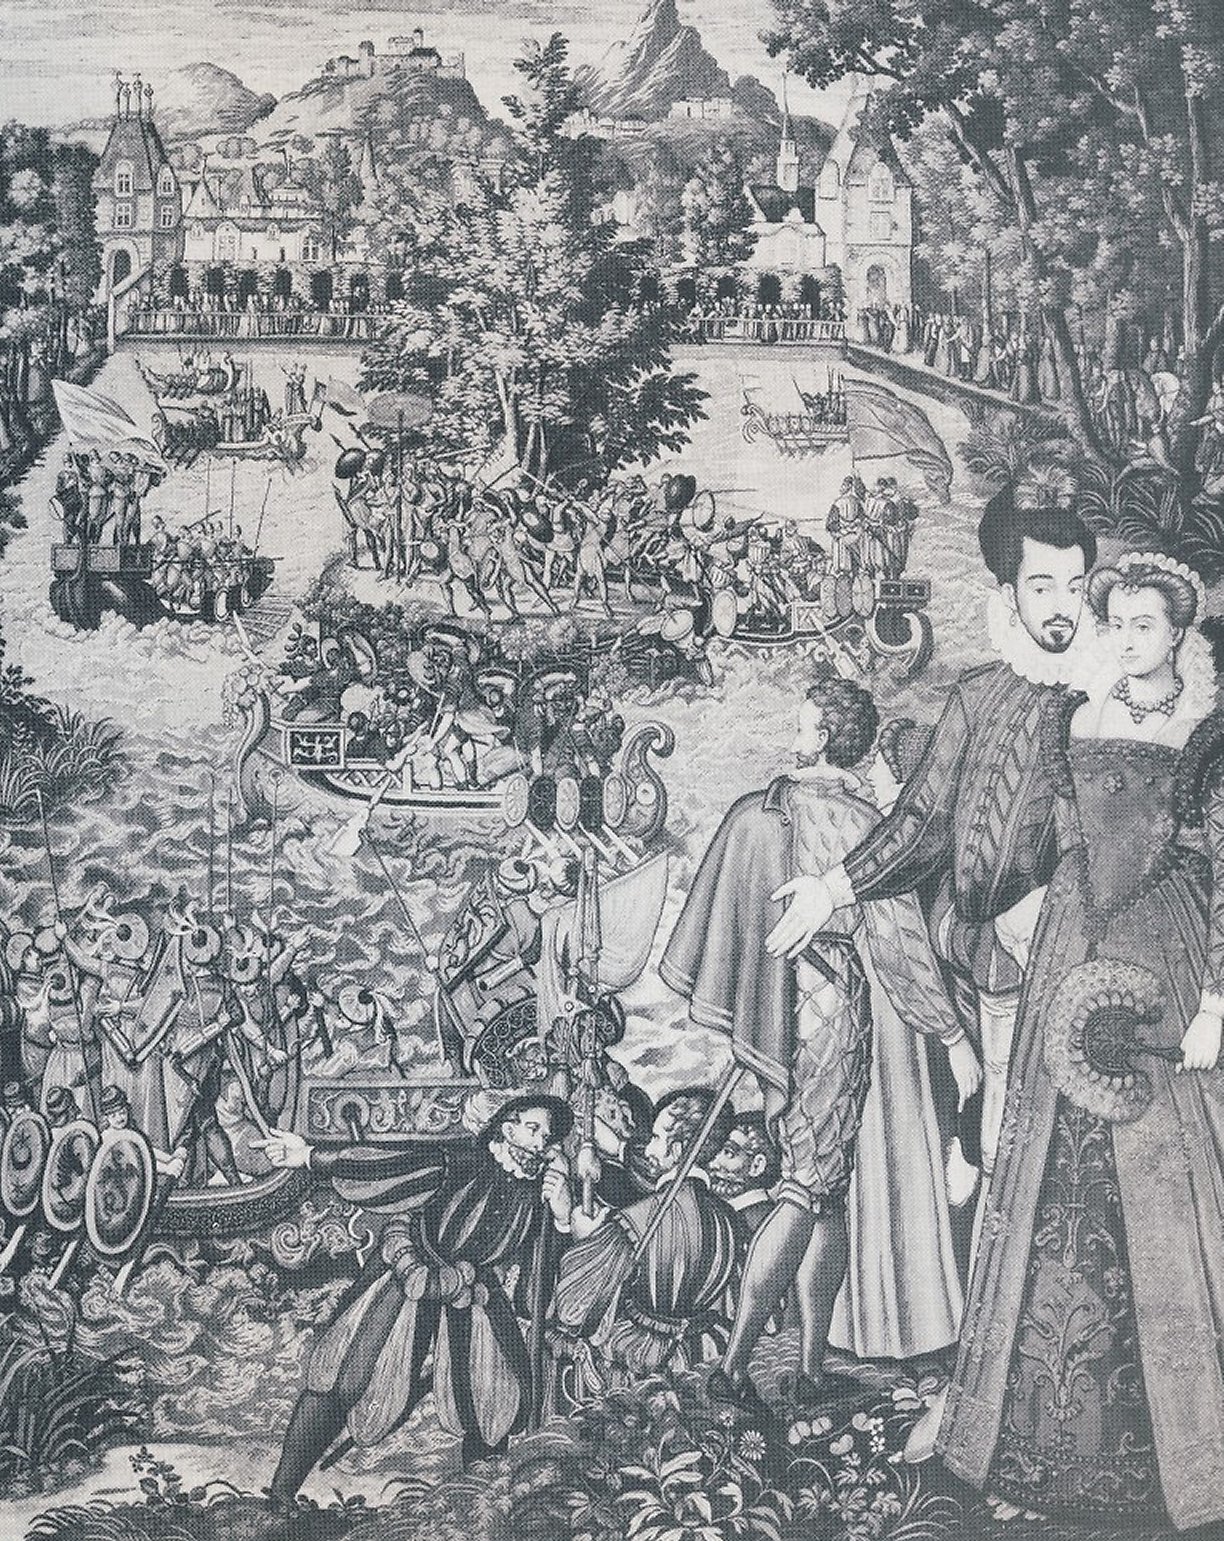 1564 - Valois tapestry, entertainments at Fontainebleau - Tapestry depicting one of Catherine de' Medici's